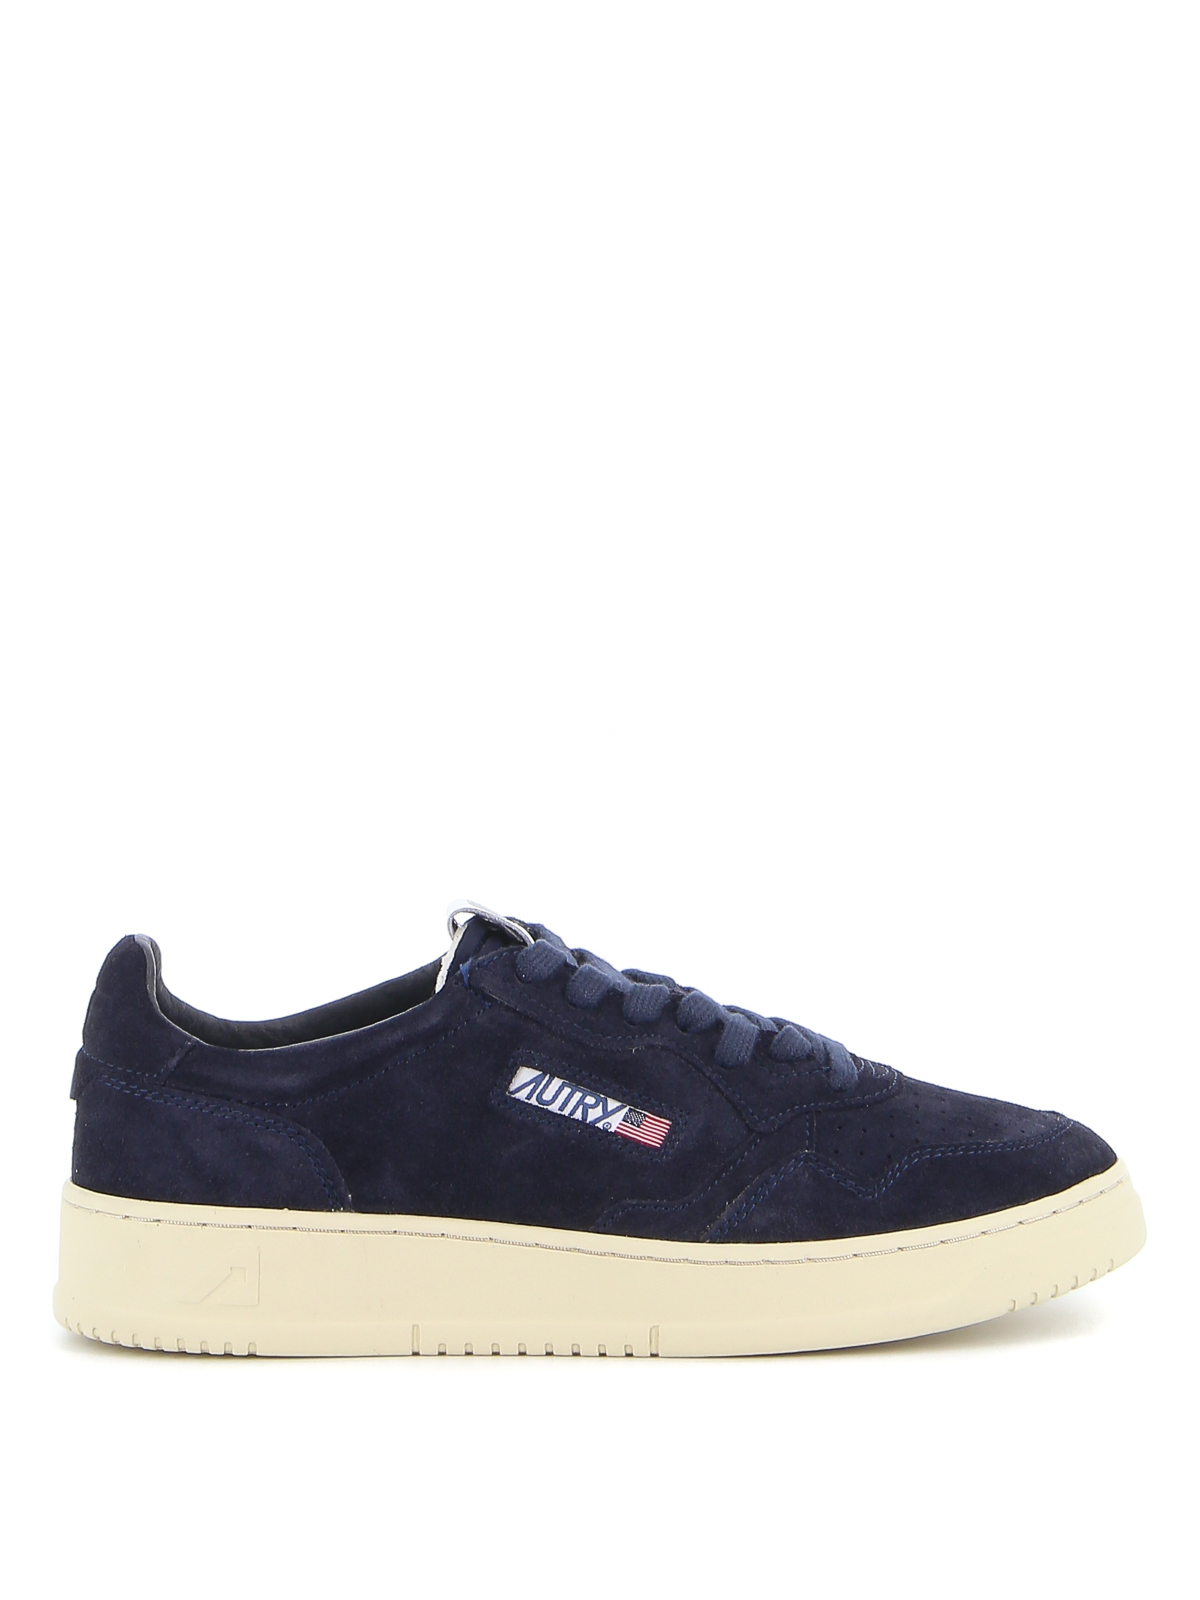 Immagine di Autry | Autry 01 Low Suede